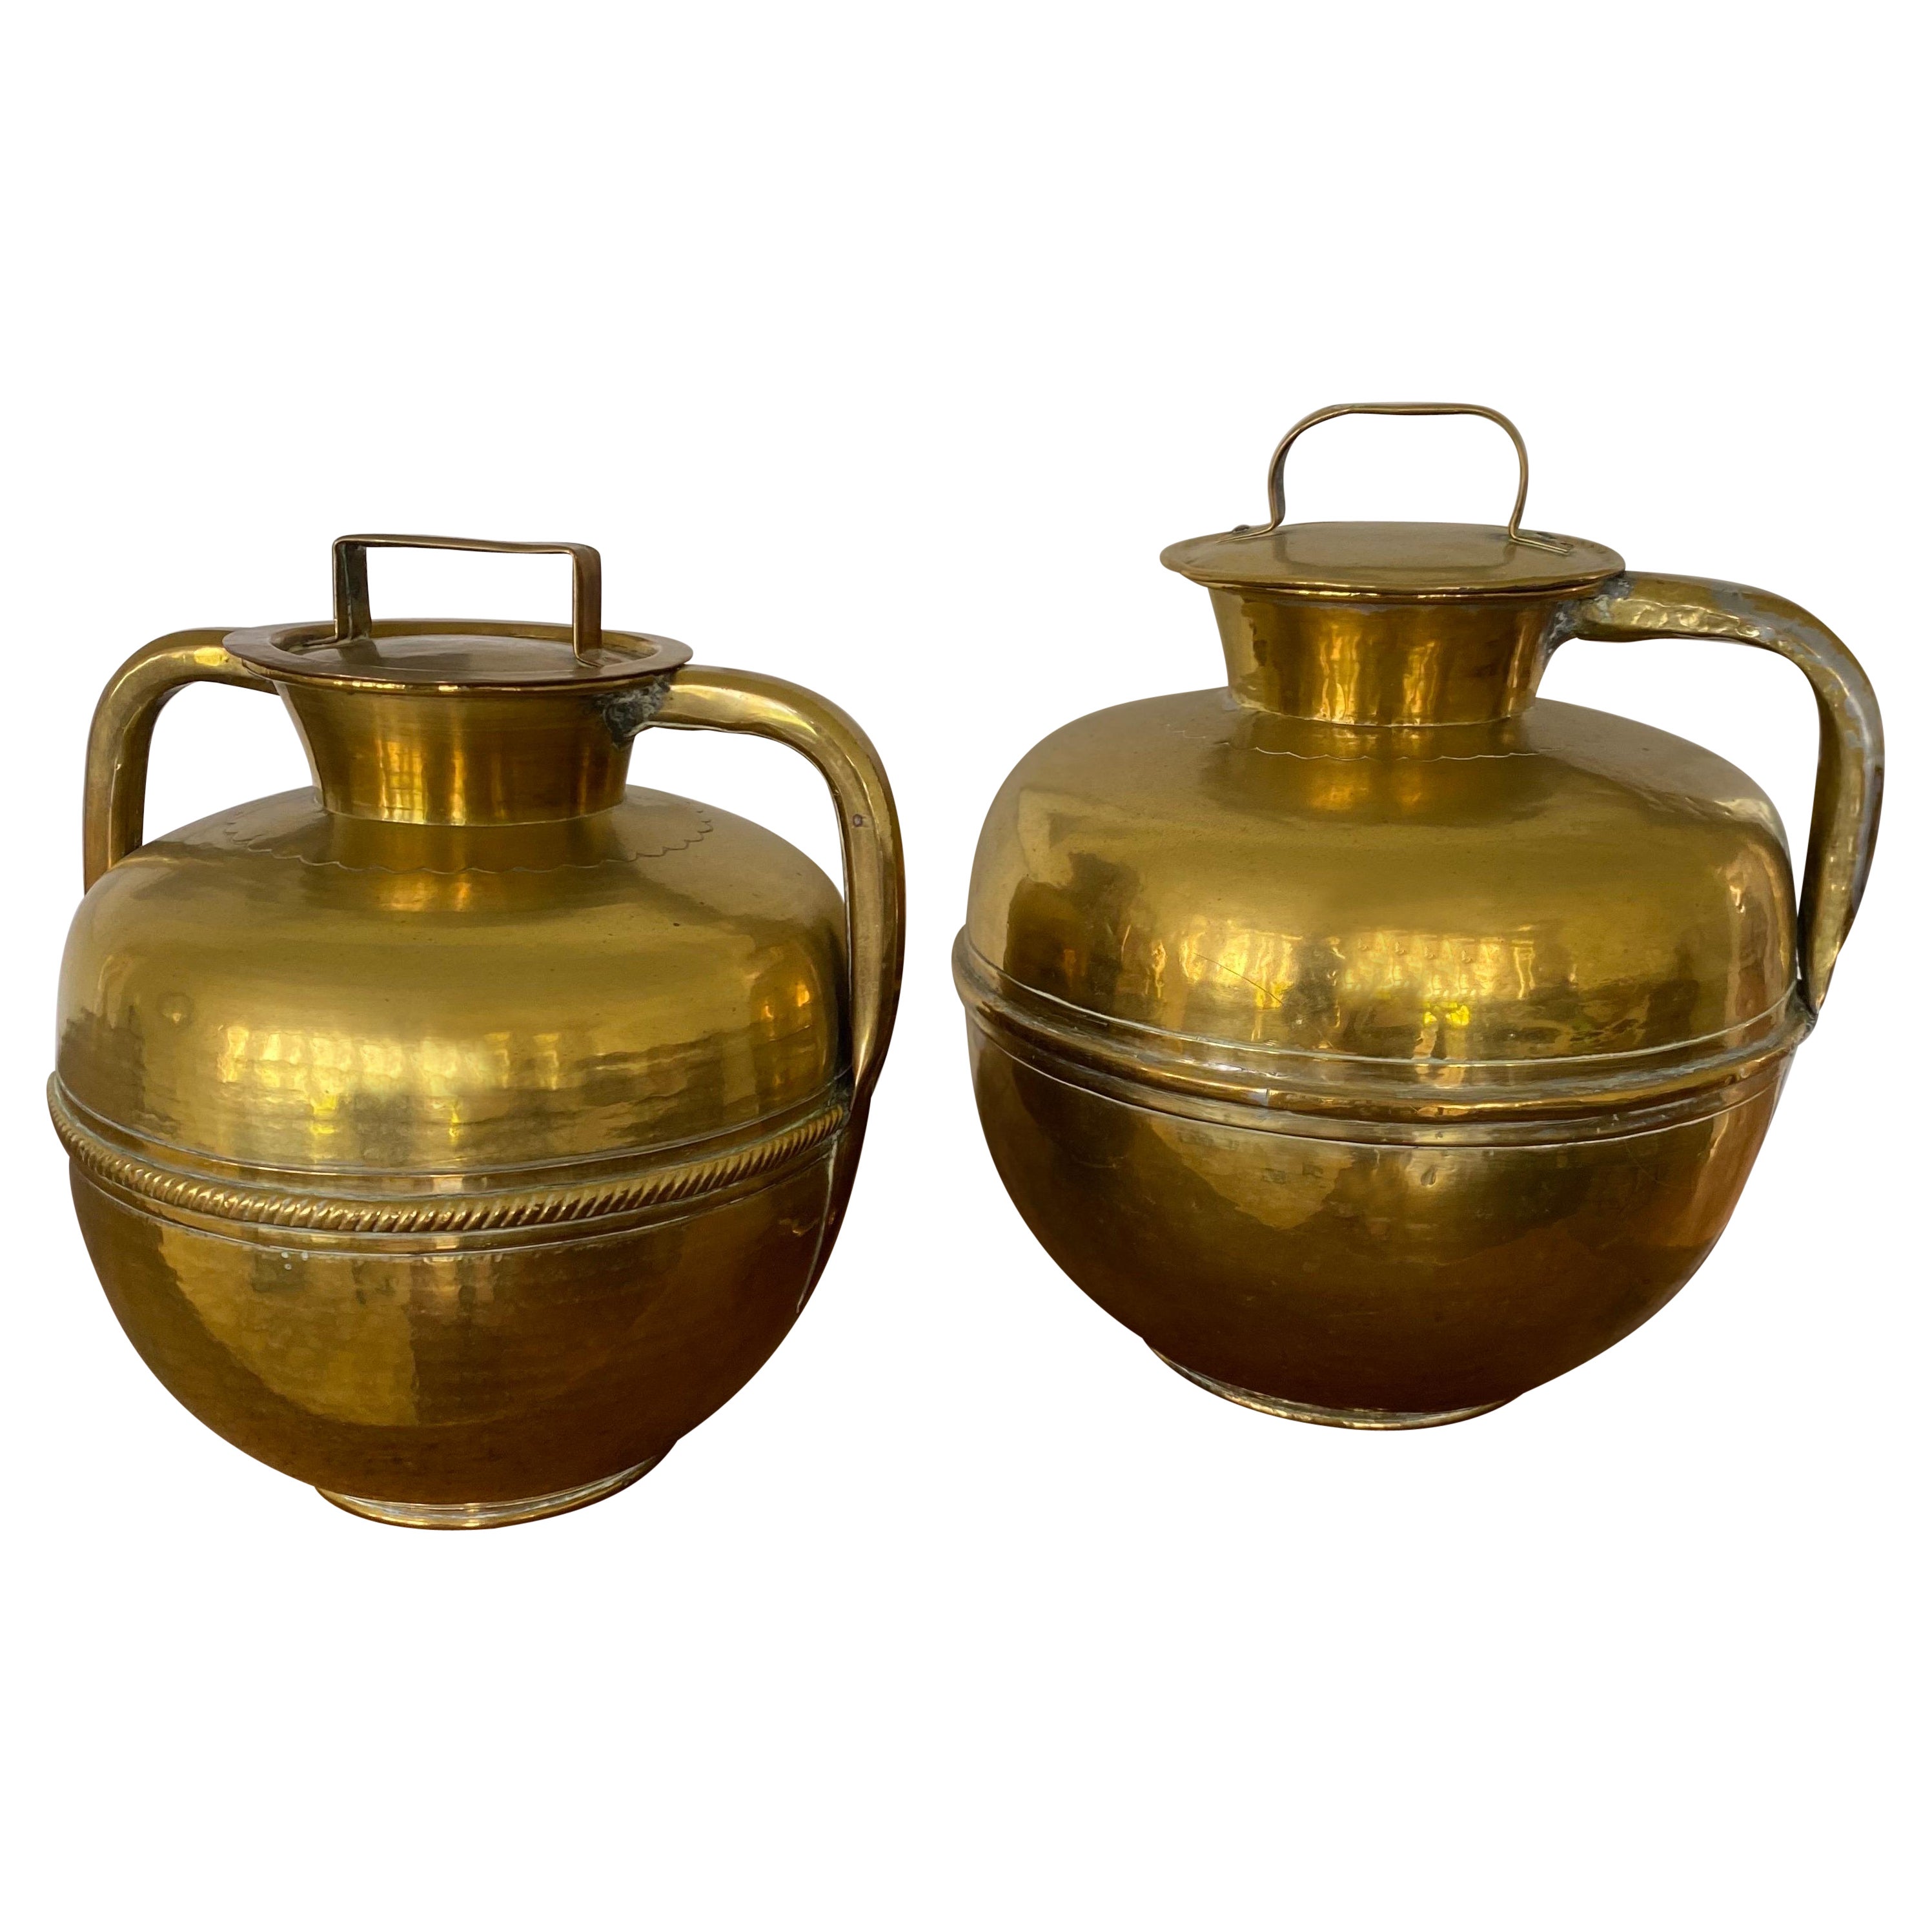 19th Century French Patinated Brass Milk Jars with Top from Rouen